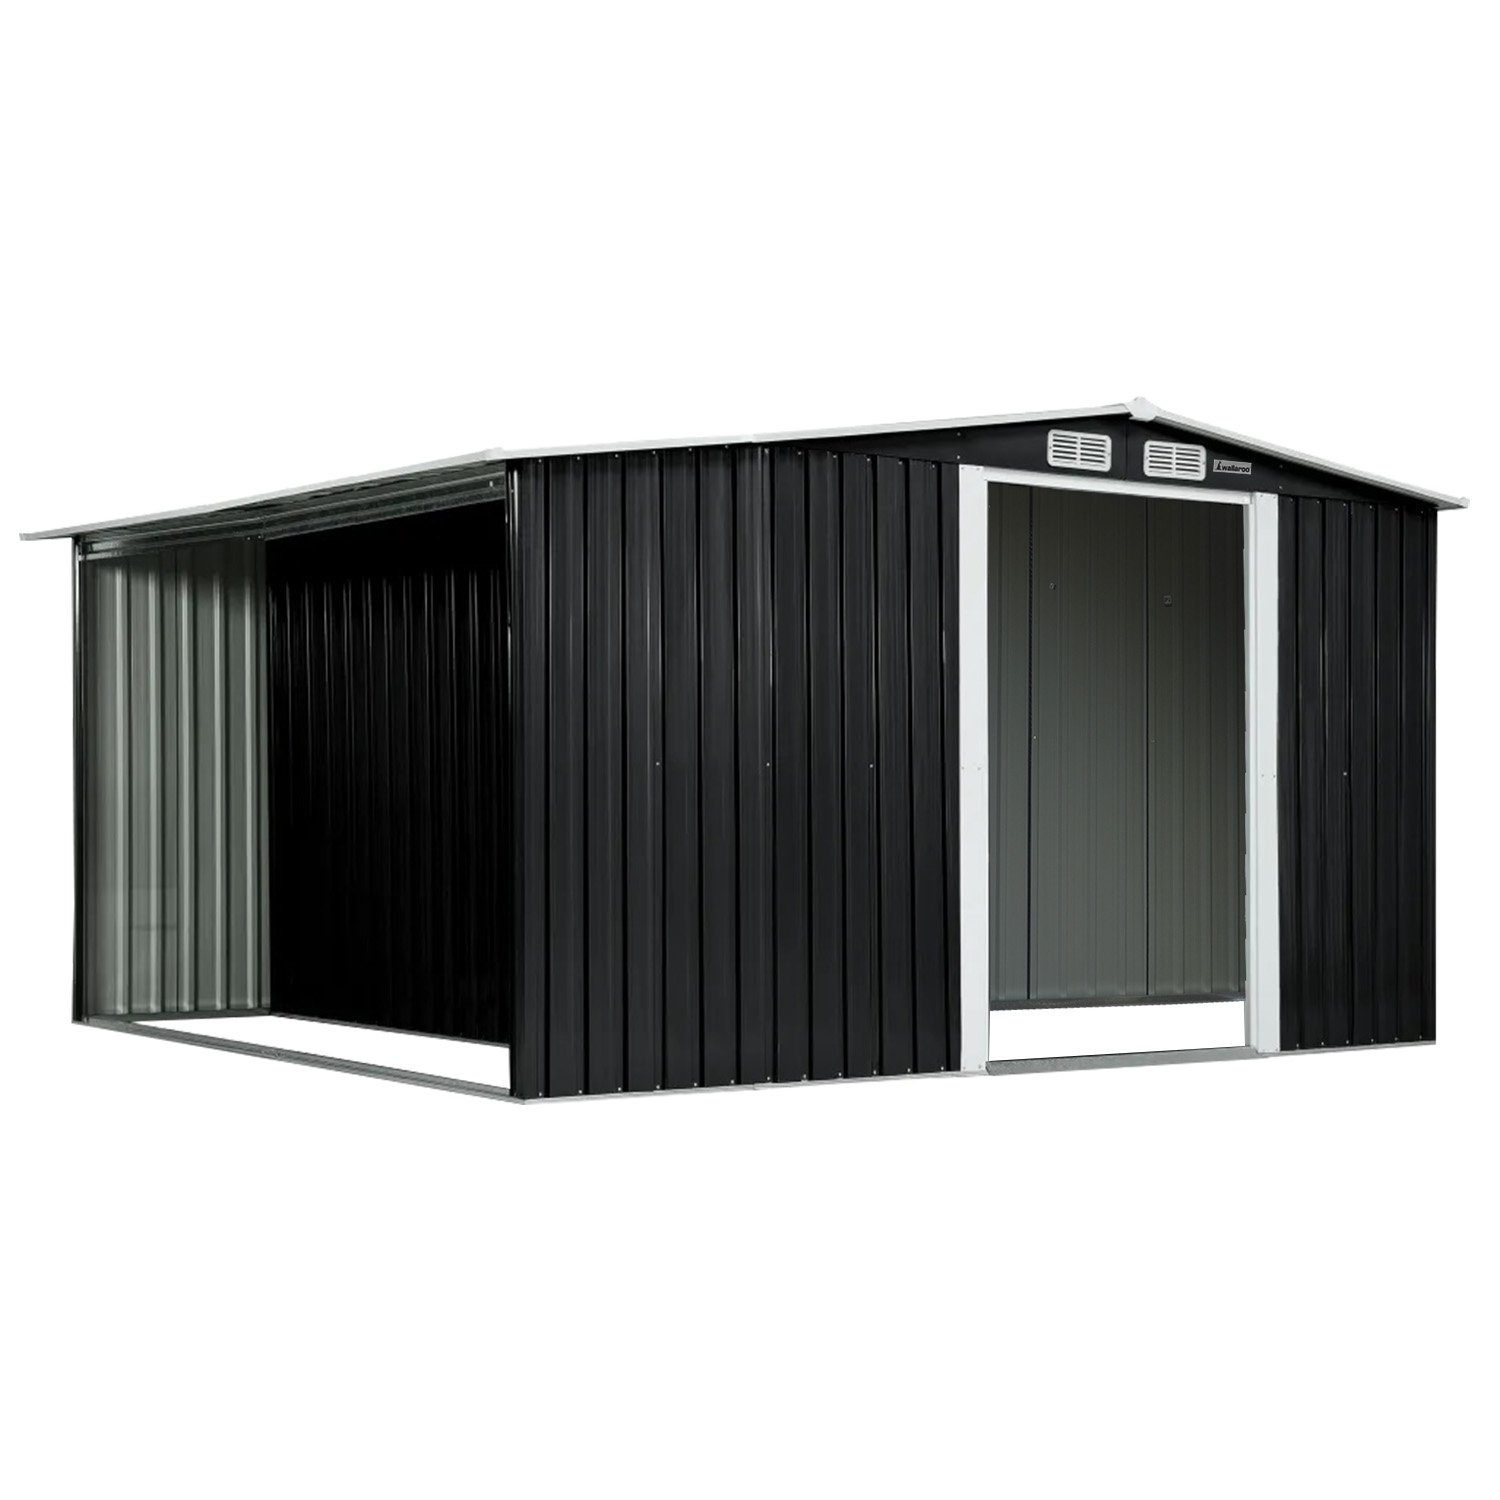 Wallaroo Garden Shed with Semi-Closed Storage 10*8FT - Black 1